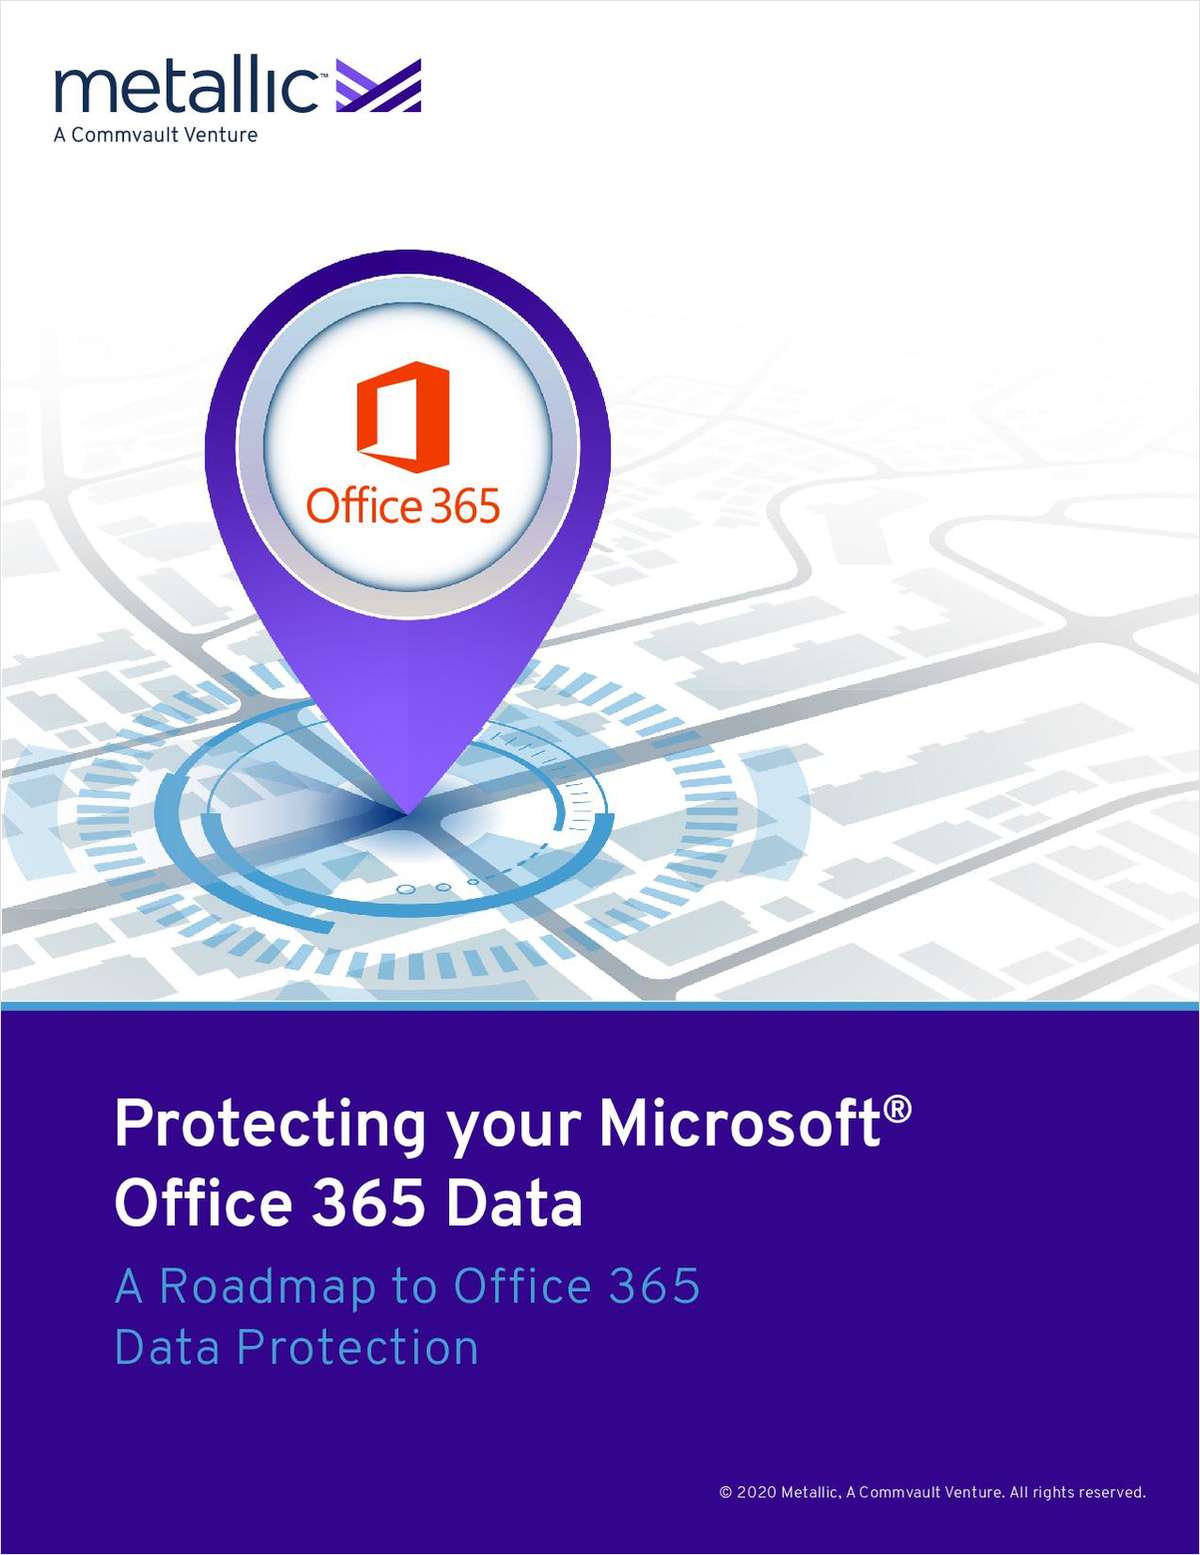 A Roadmap to Office 365 Data Protection